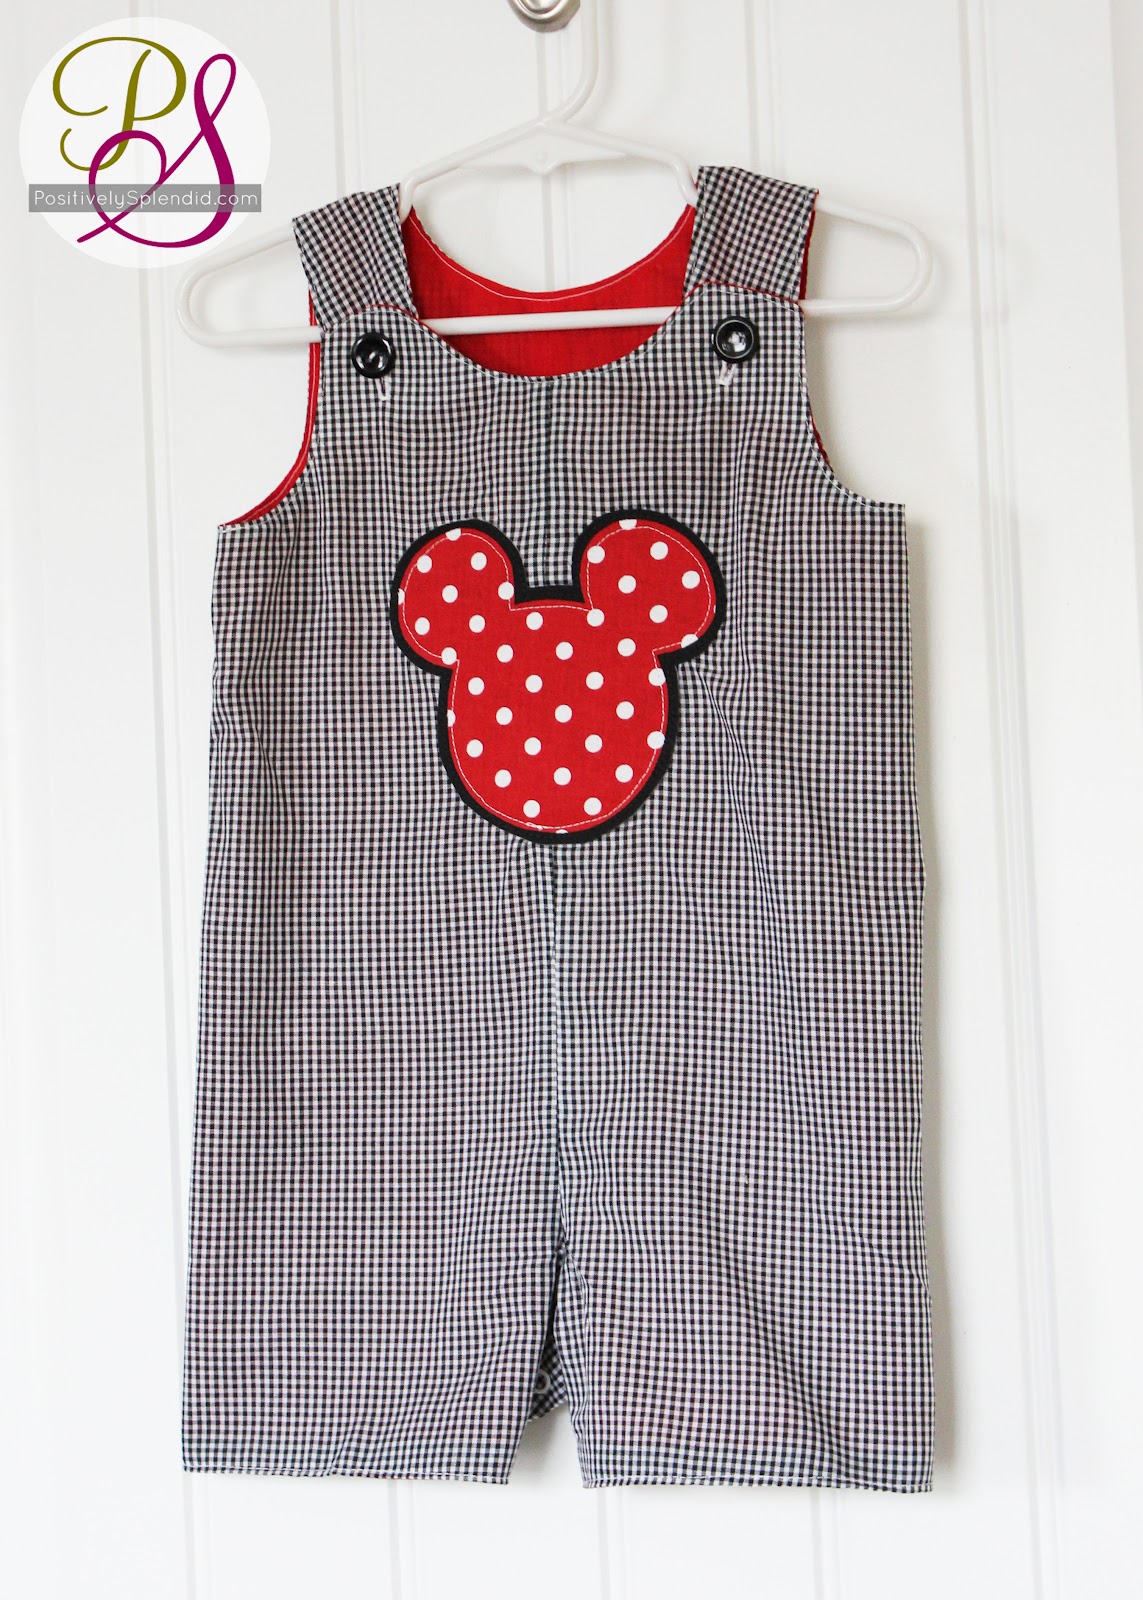 diy disney outfits for boys and girls